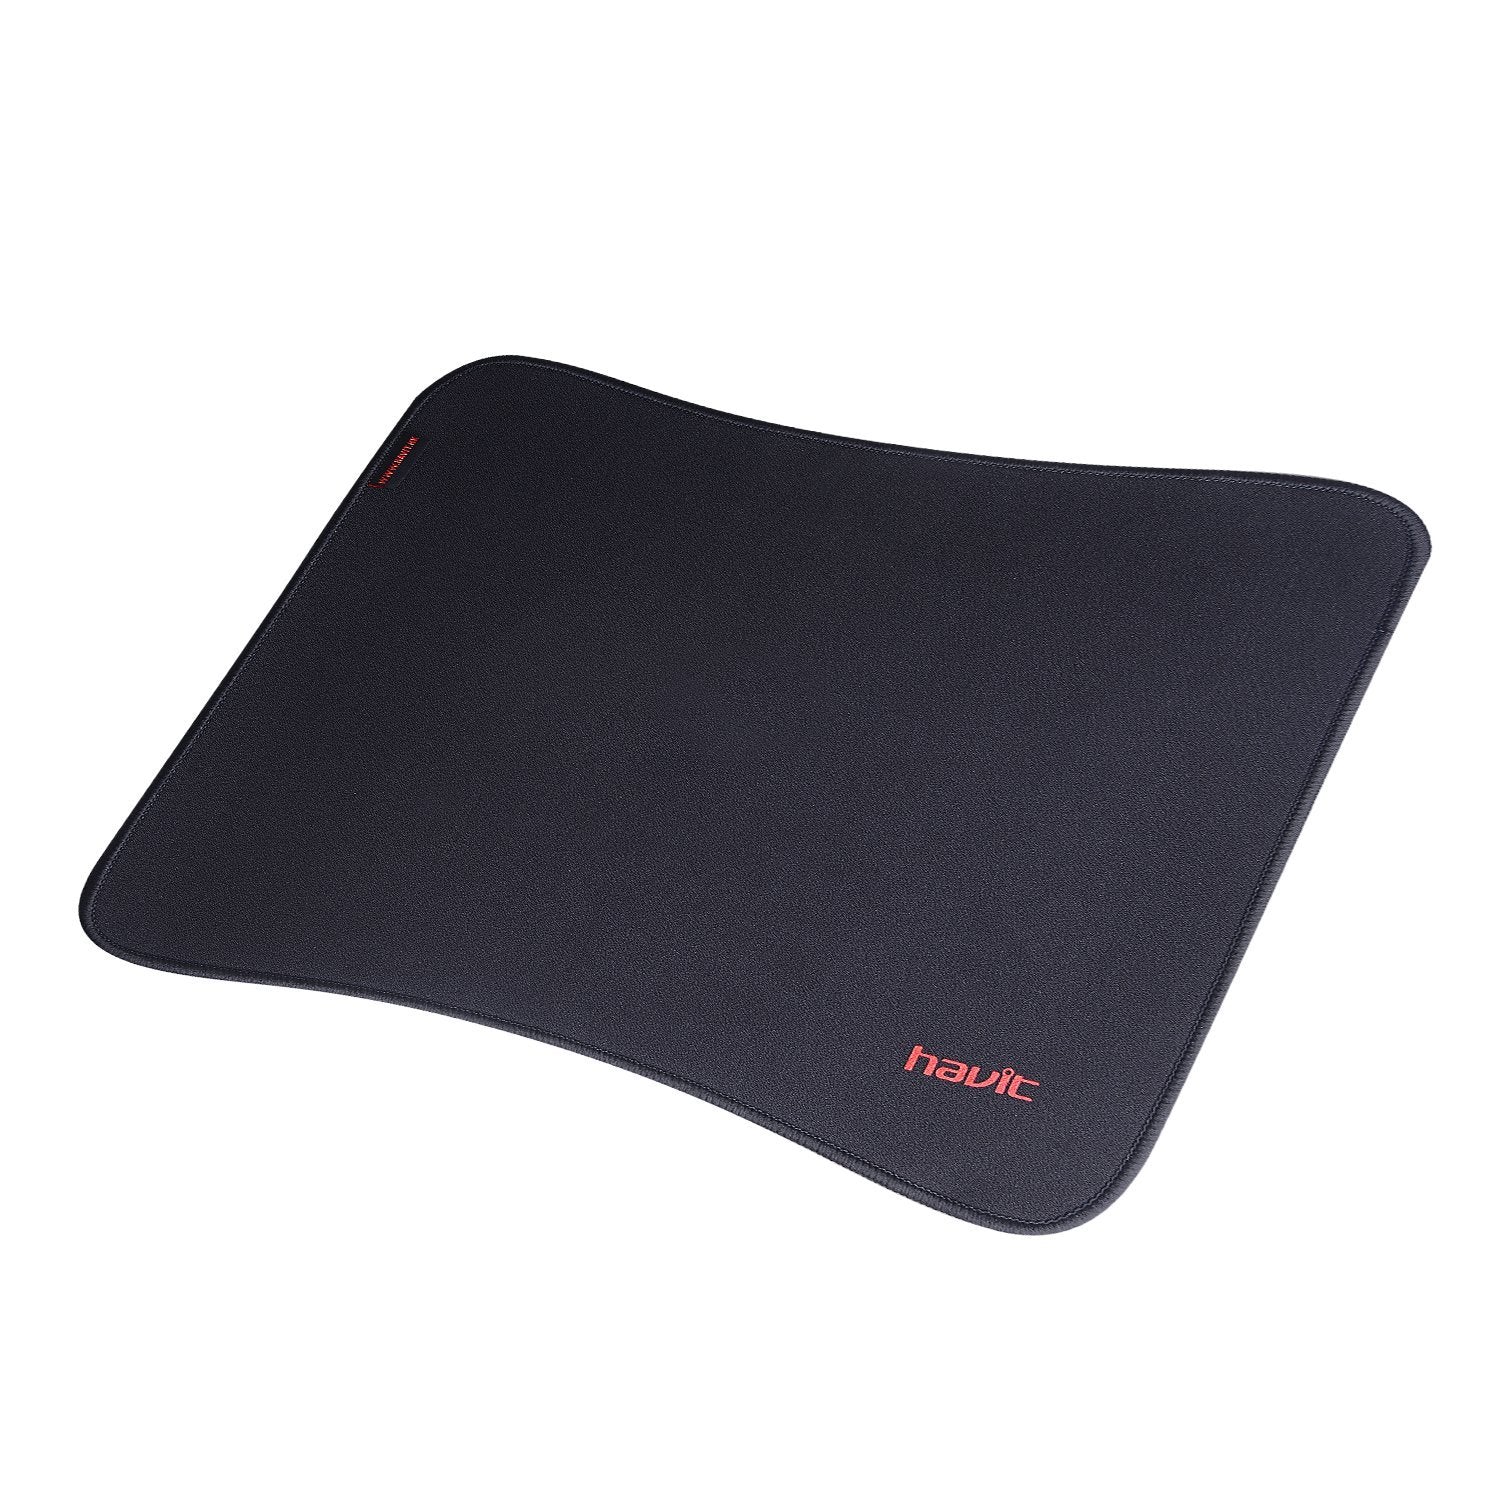 HAVIT HV-MP850 Gaming Mouse Pad, Water-Resistant with Non-slip Rubber Base